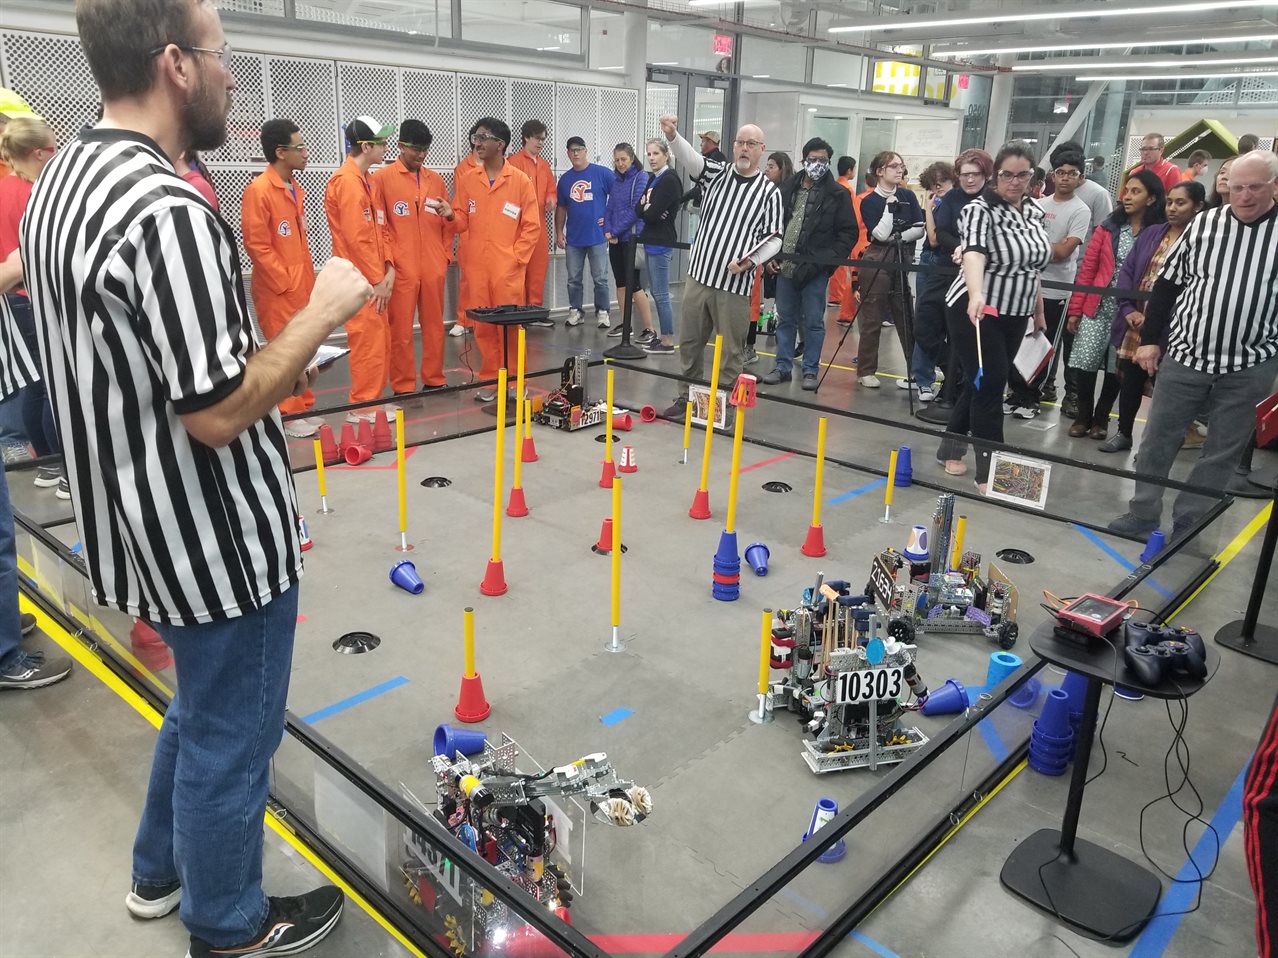 FIRST Illinois Robotics Competition at the University of Illinois at Urbana-Champaign in November 2022